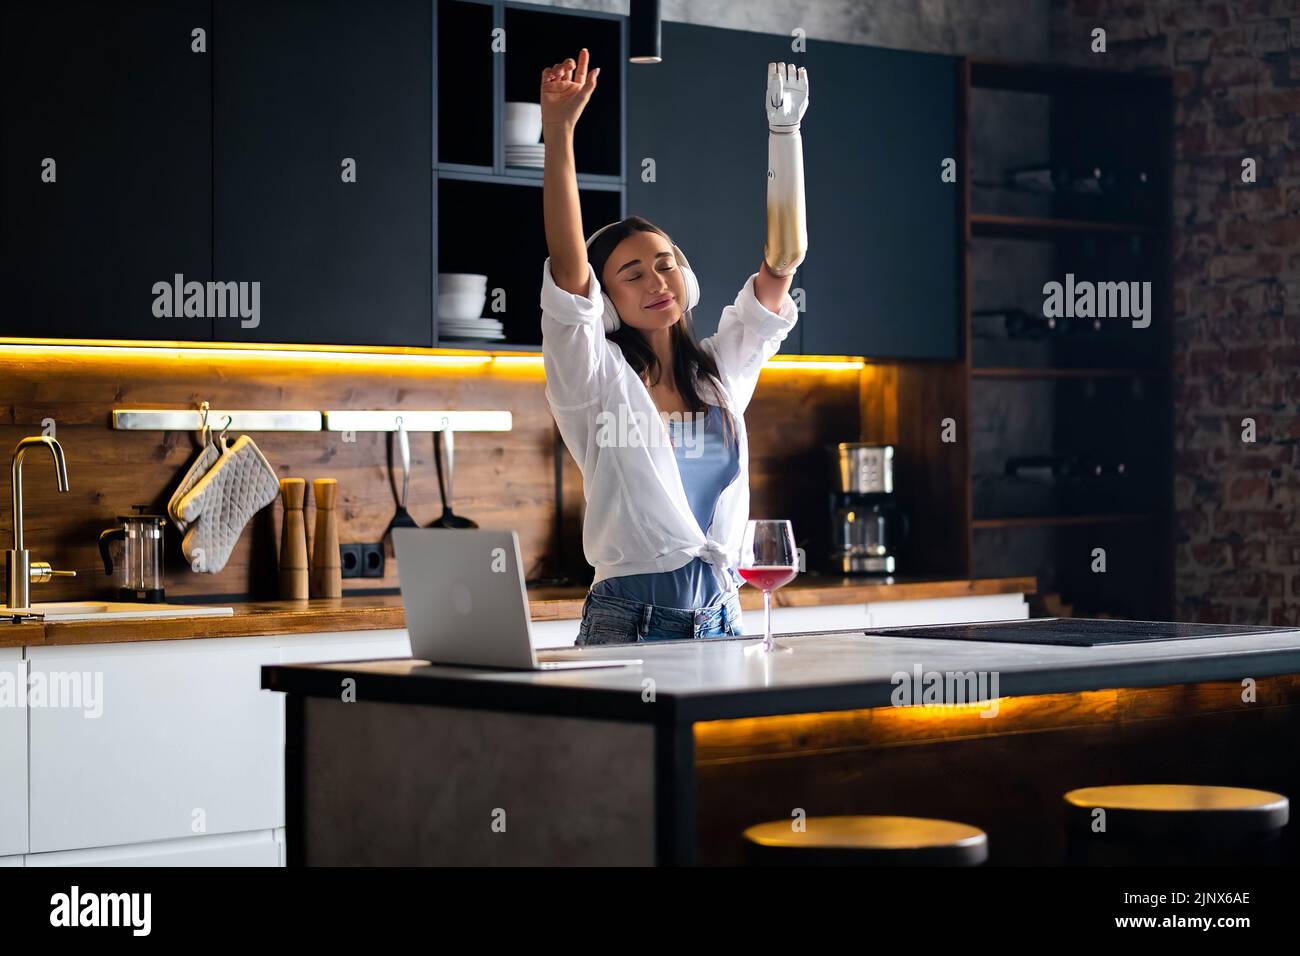 Happy girl with prosthetic arm listening music headphones kitchen at home, woman with disability relaxing and dancing. Stock Photo